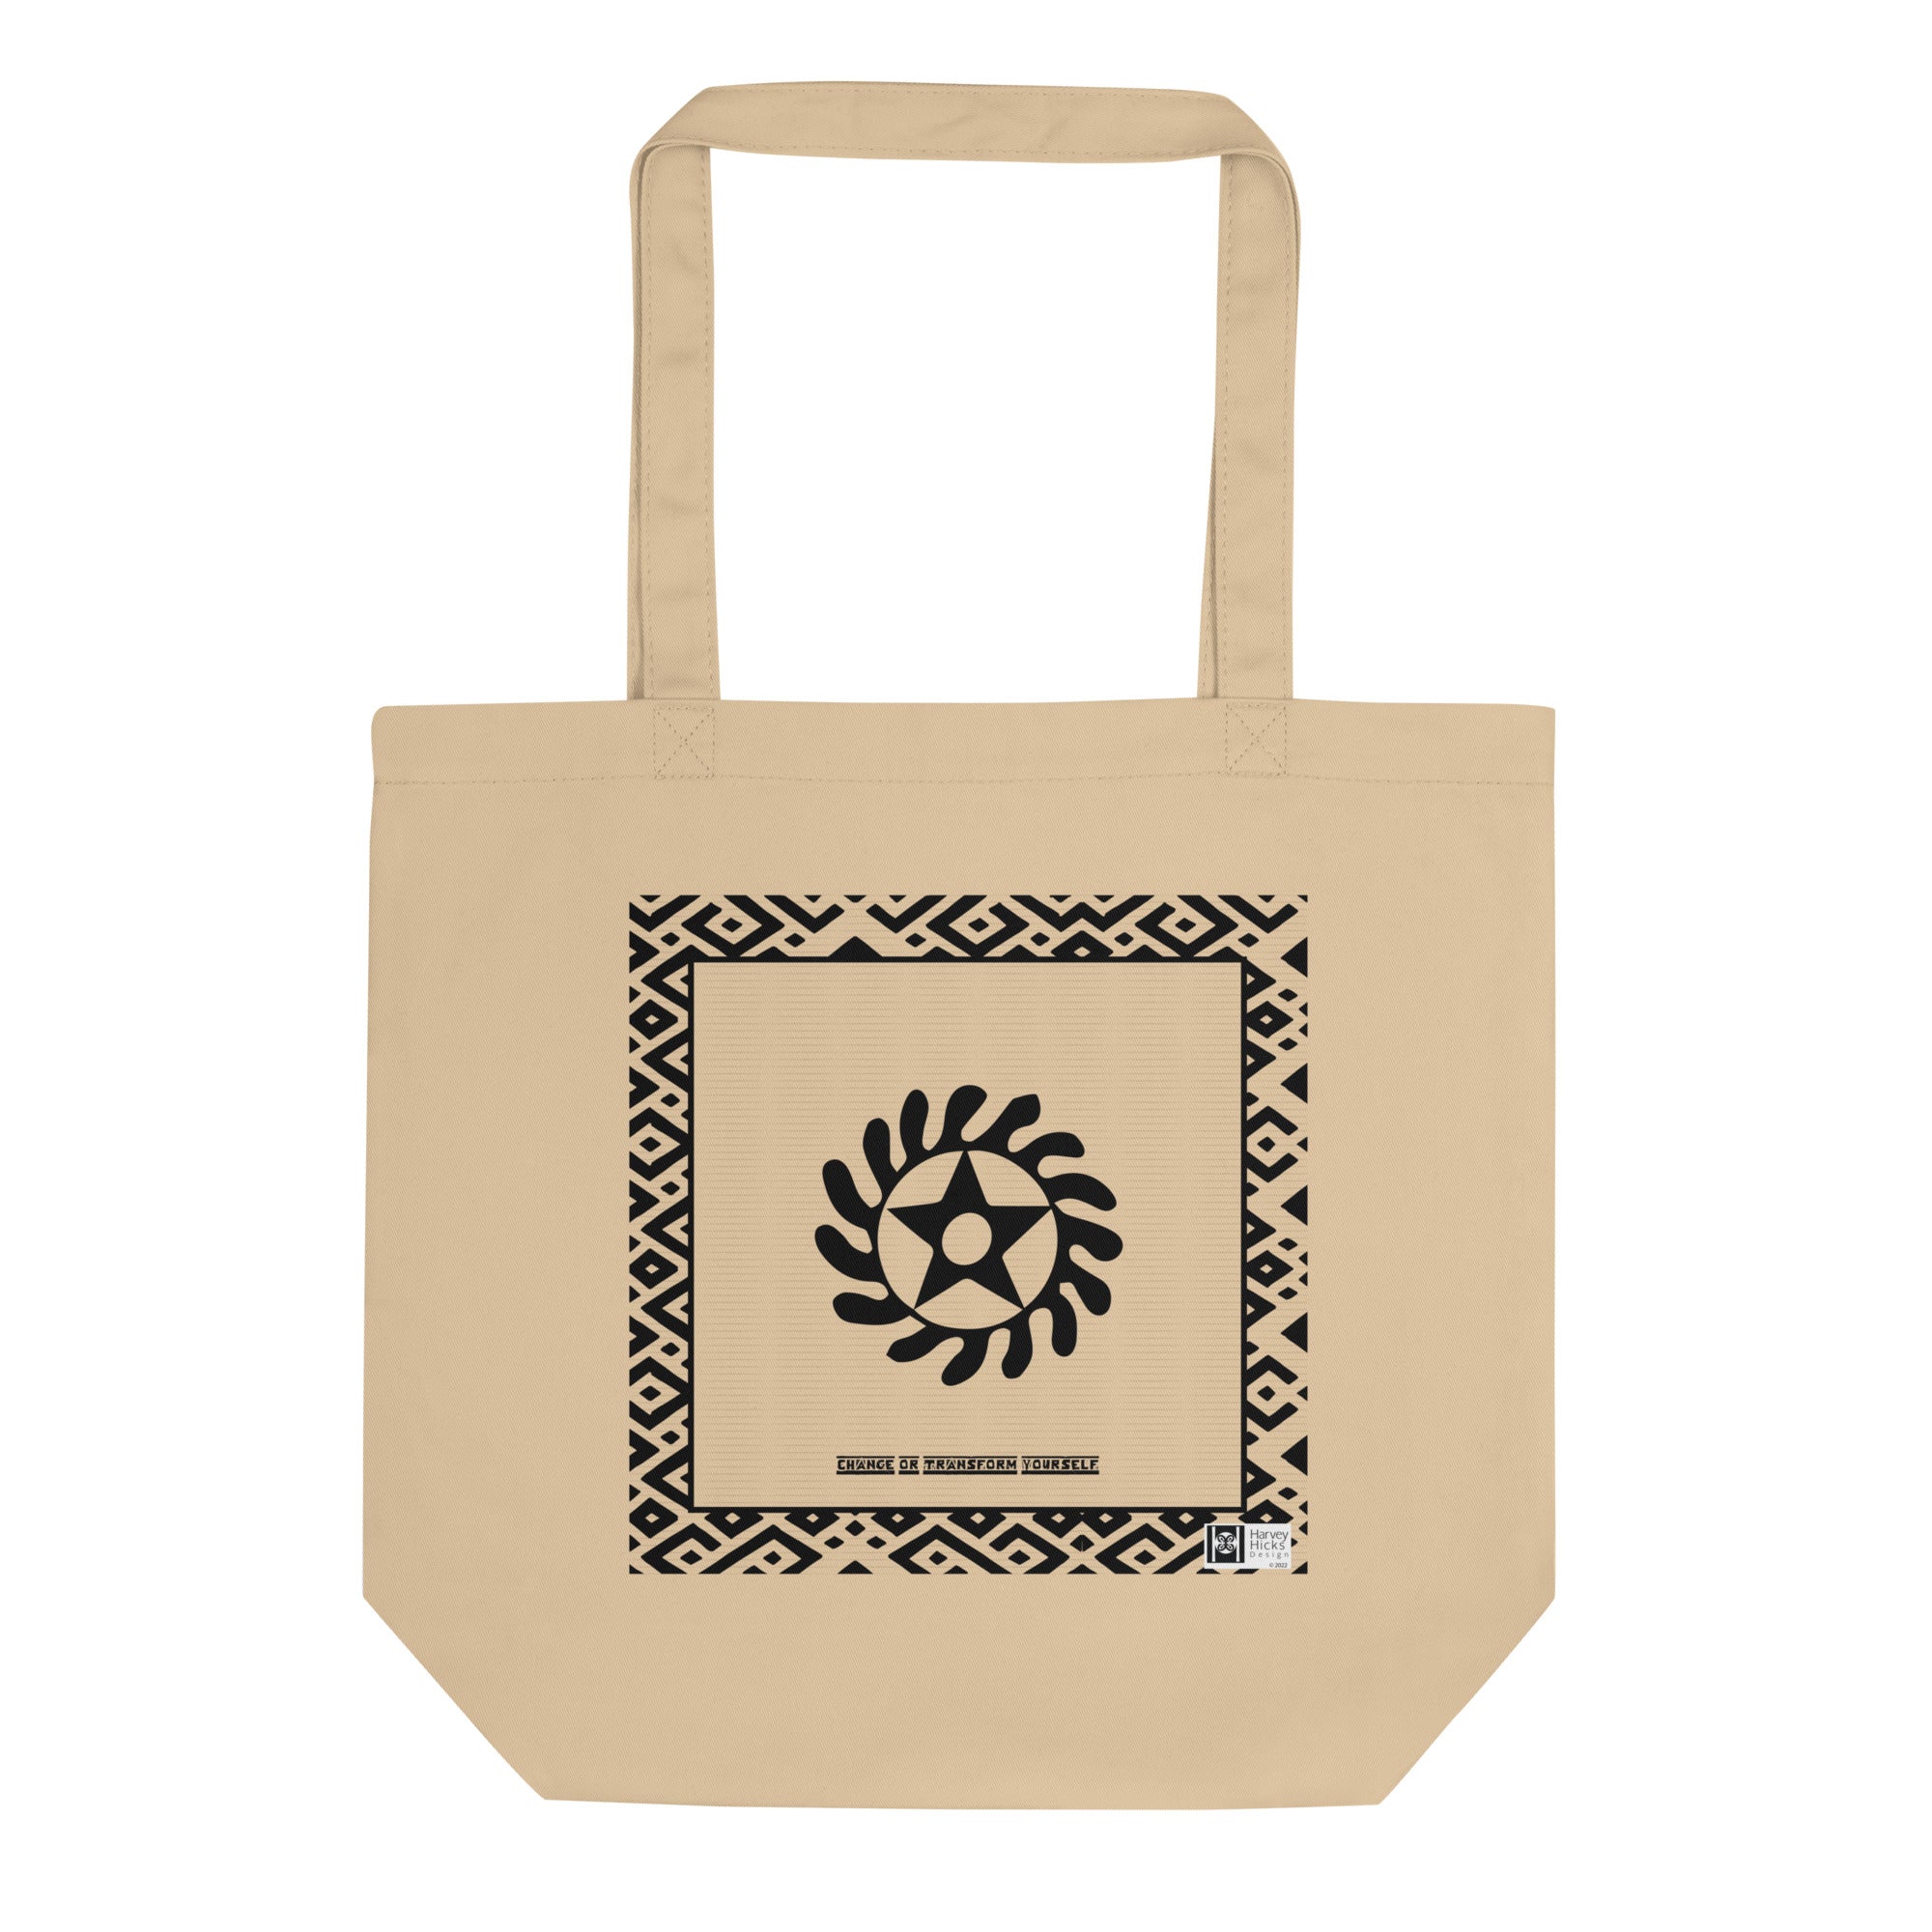 100% cotton Eco Tote Bag, featuring the Adinkra symbol for transformation